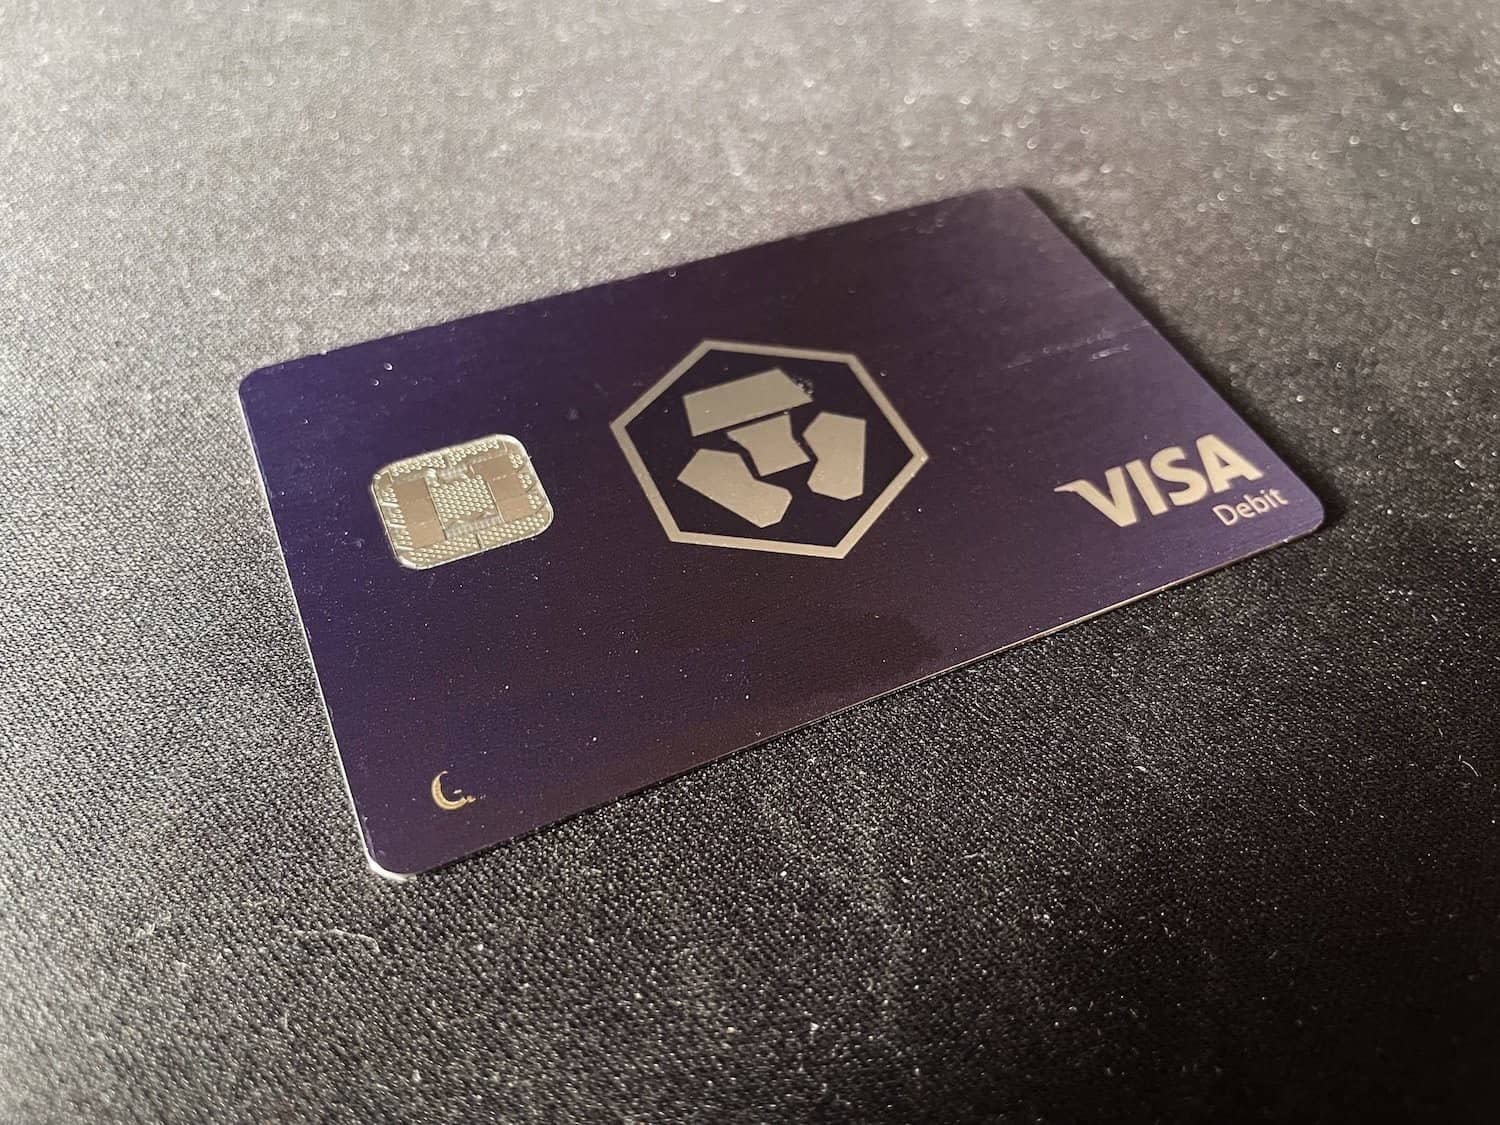 Get Apple Pay for the Crypto.com visa card with this trick.